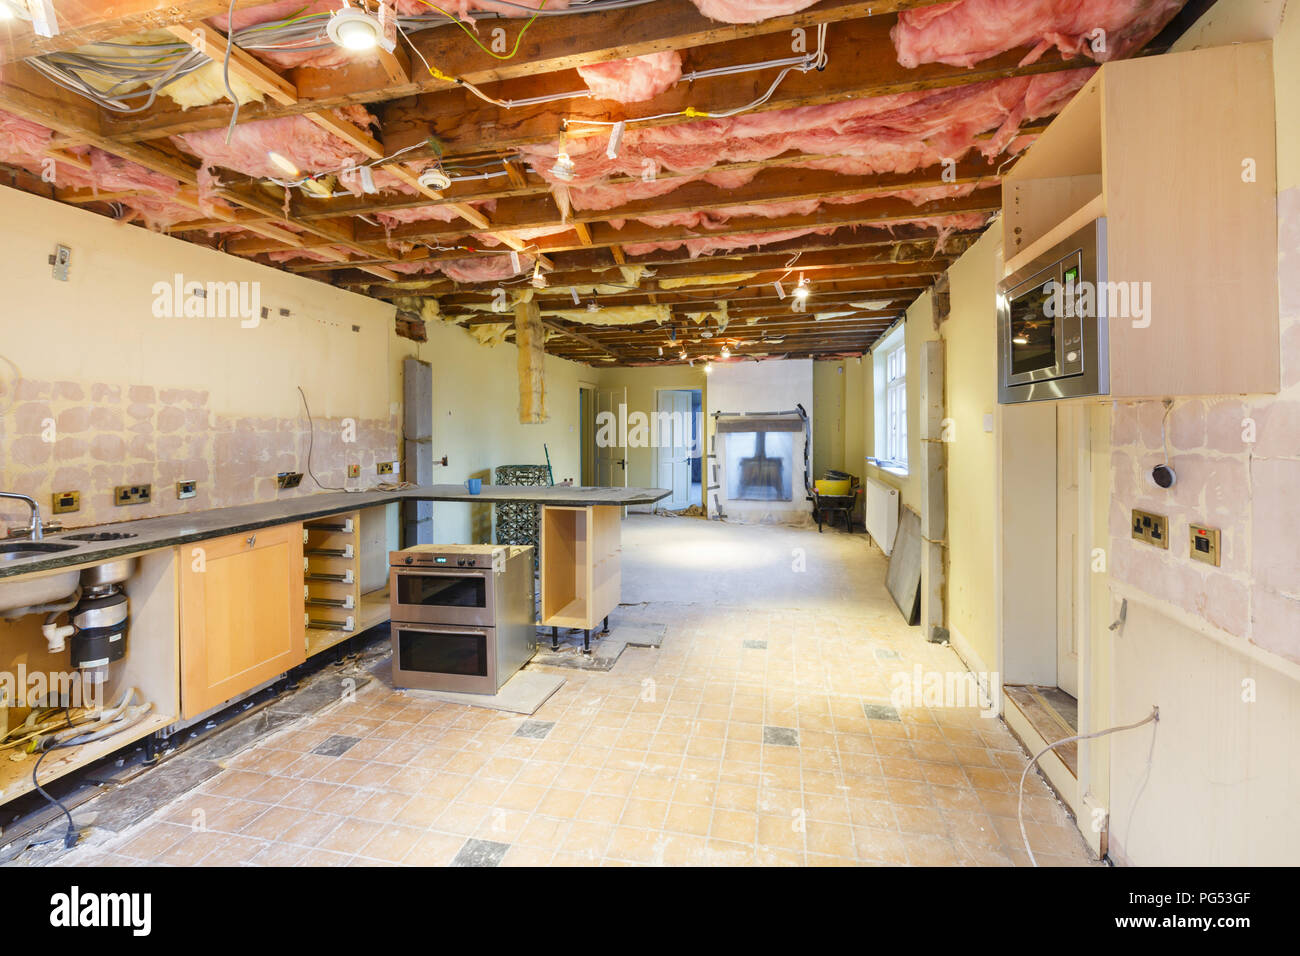 Kitchen removed in a rip out prior to renovation and replacement Stock Photo